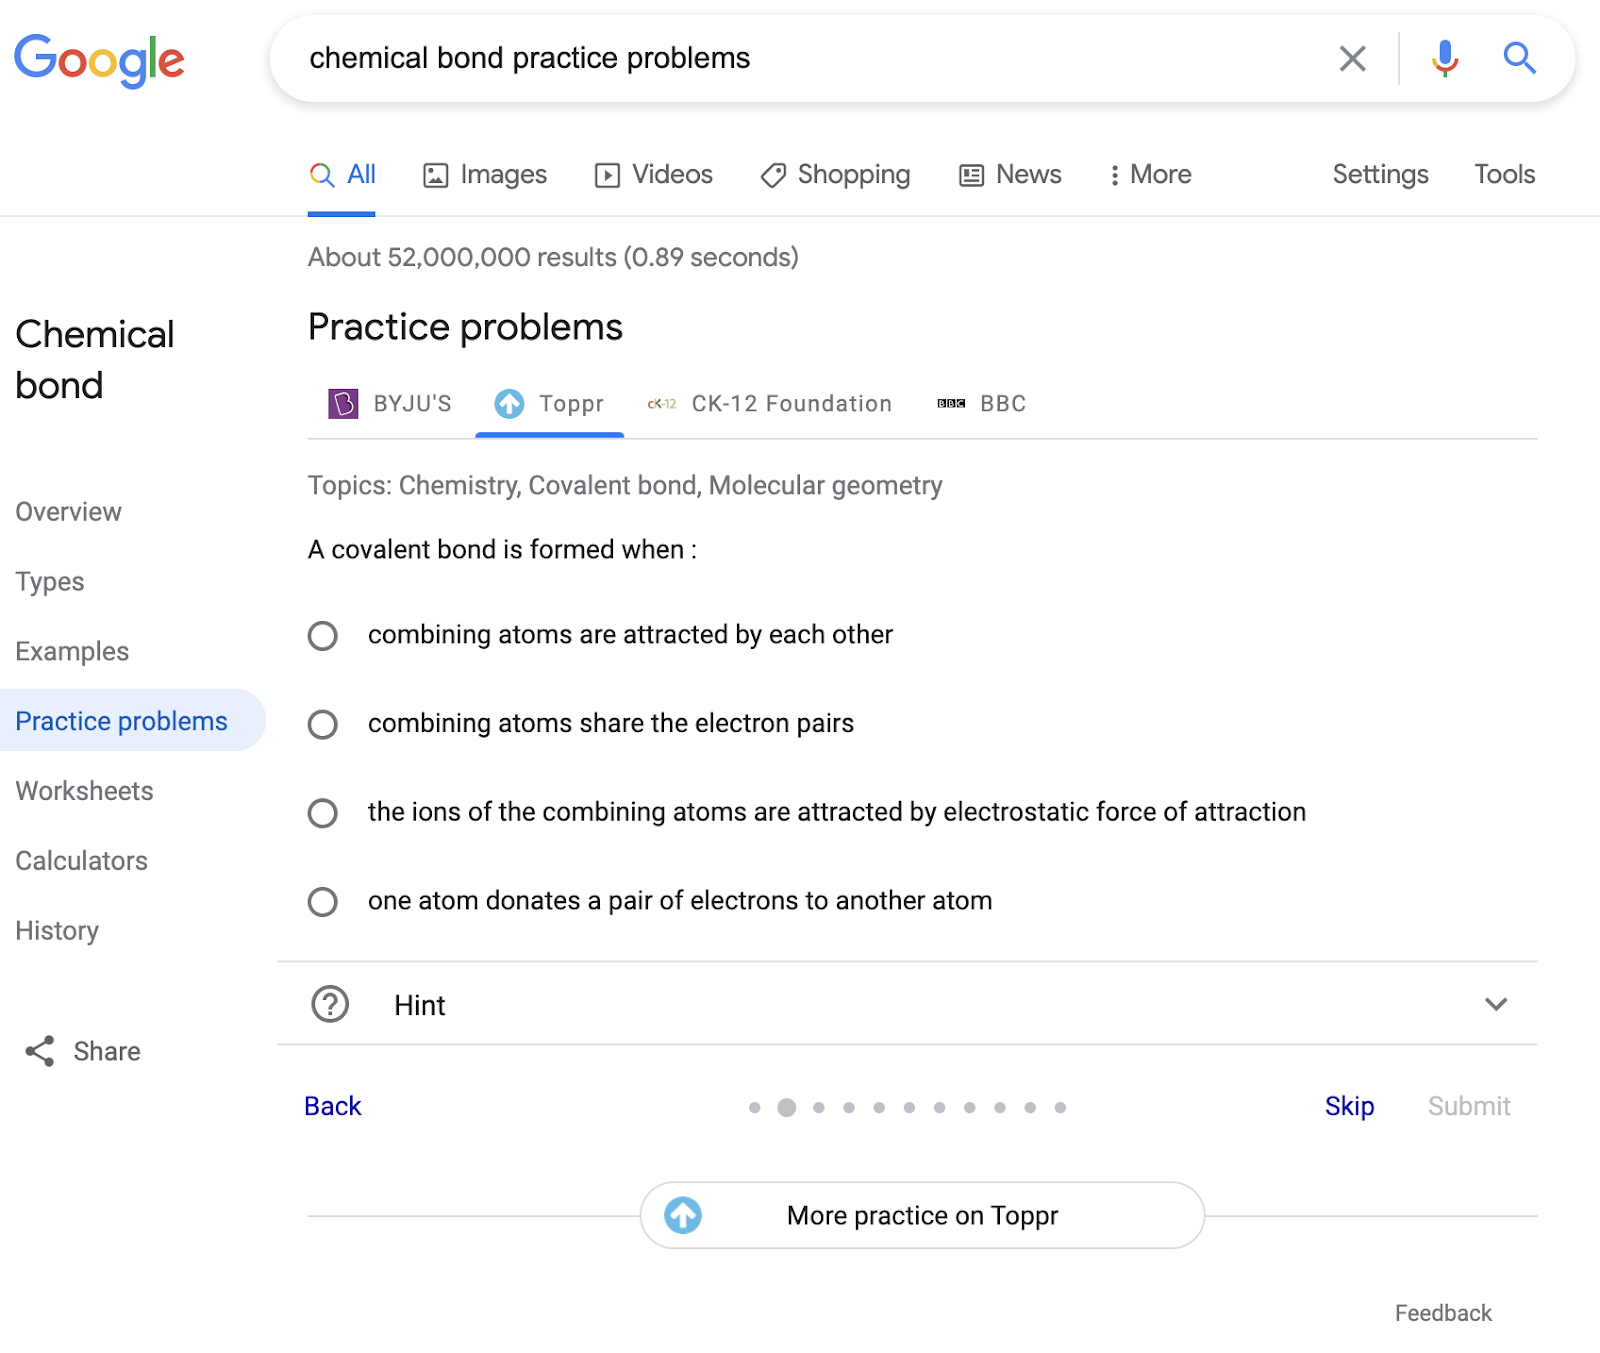 practice problems in search results